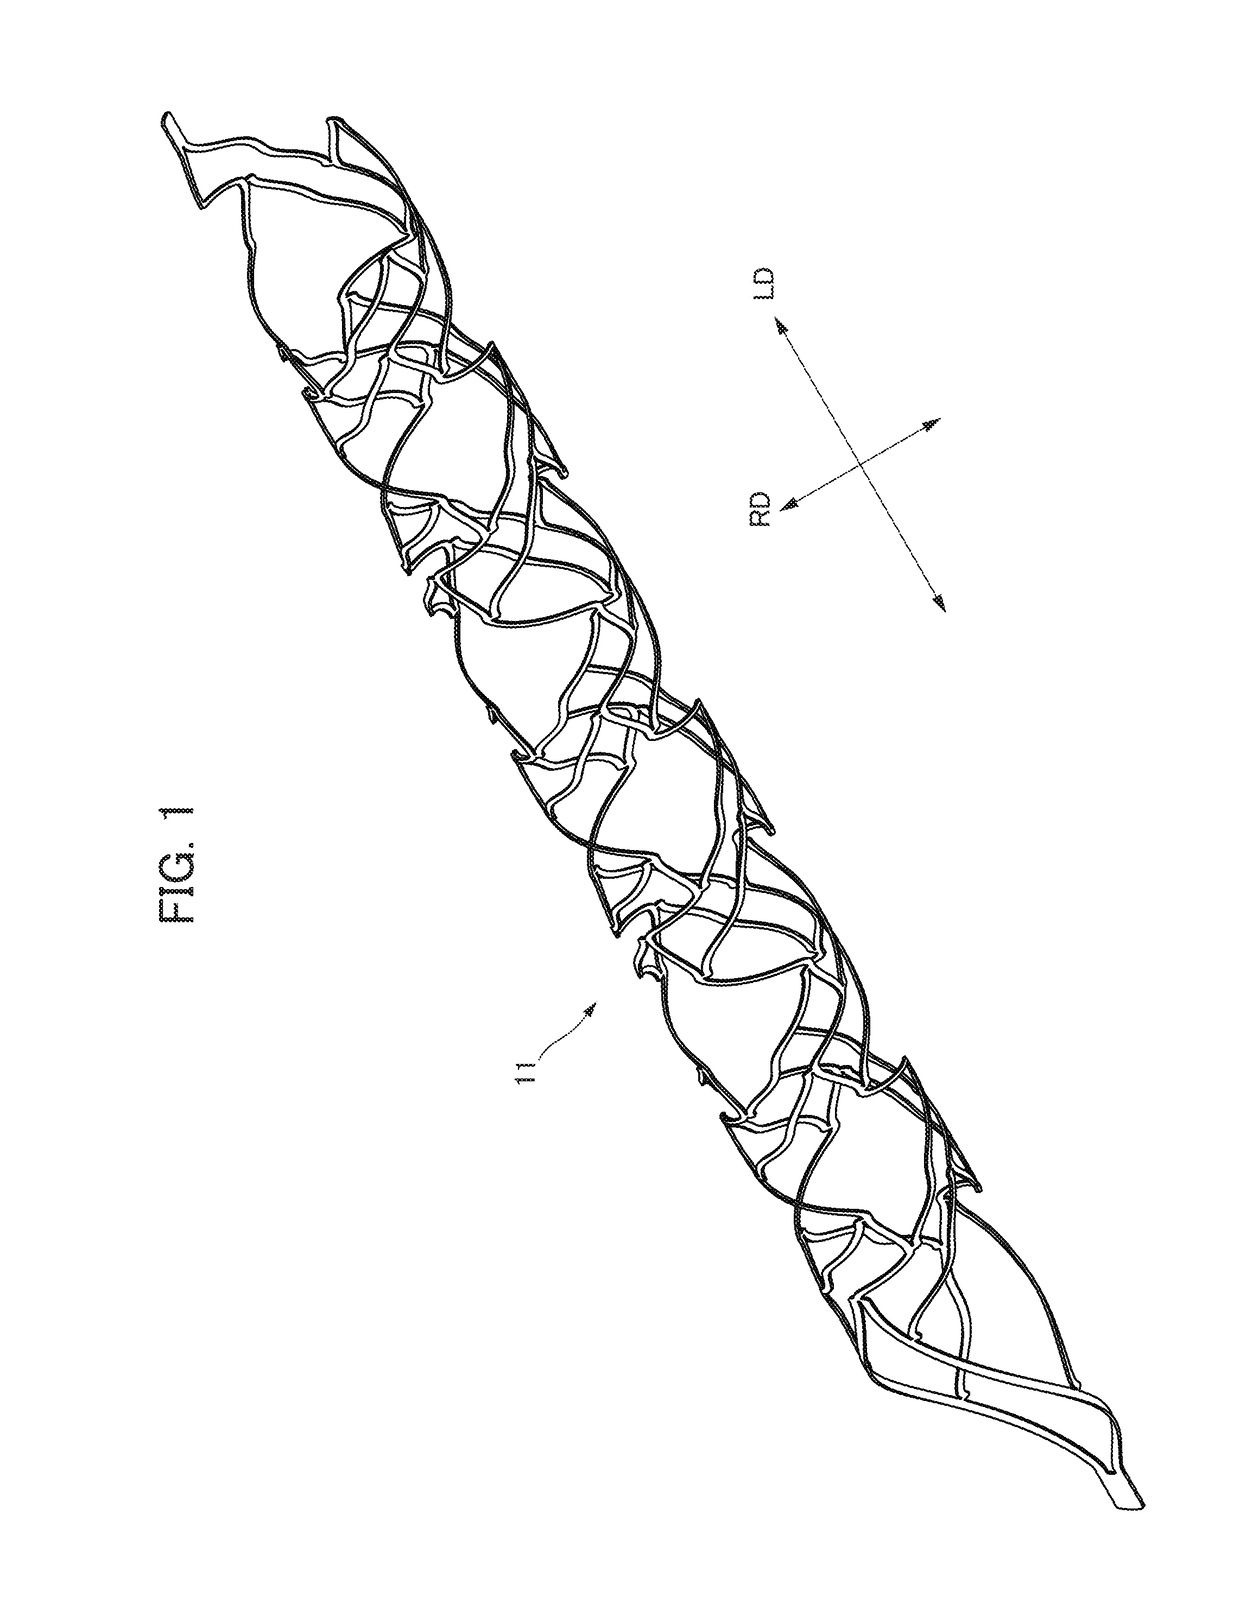 Highly flexible stent